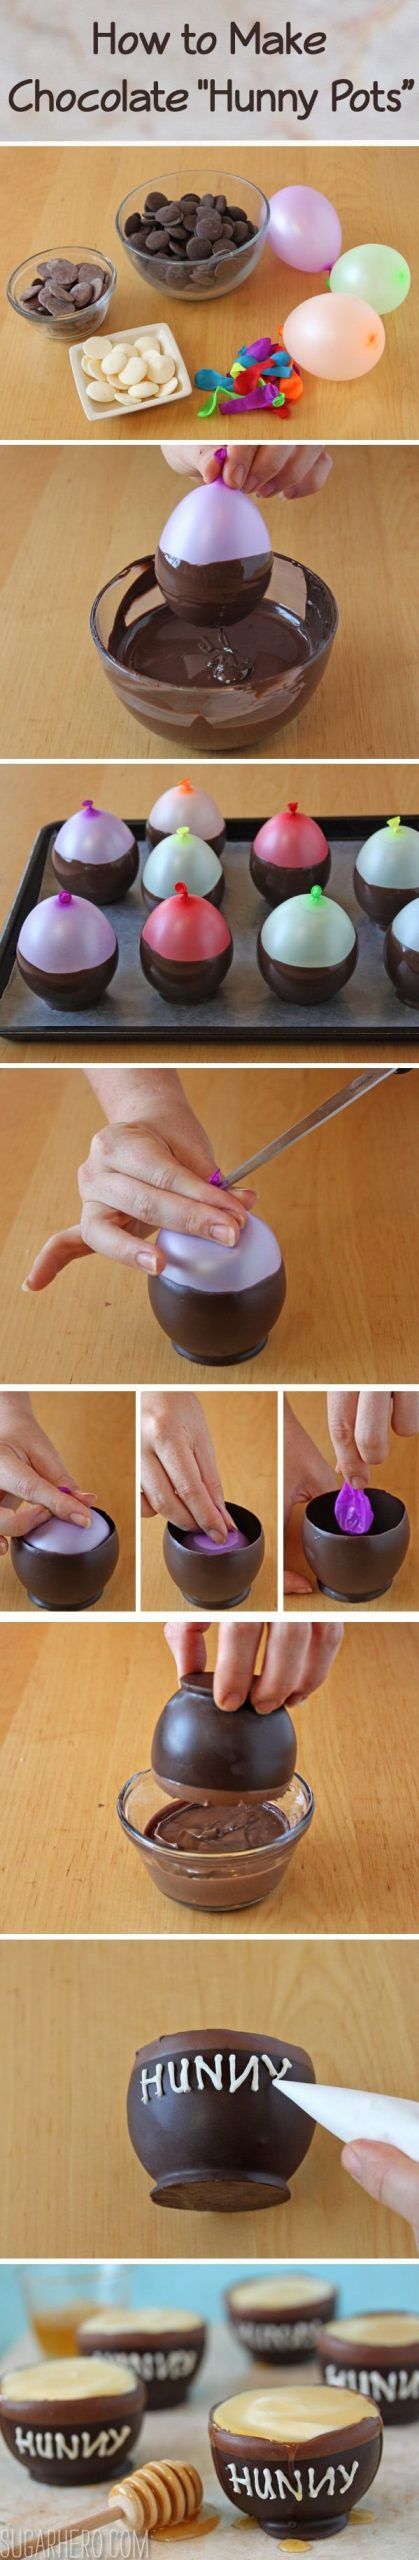 How to Make Chocolate “Hunny Pots” with Honey Mousse – photo tutorial and recipes